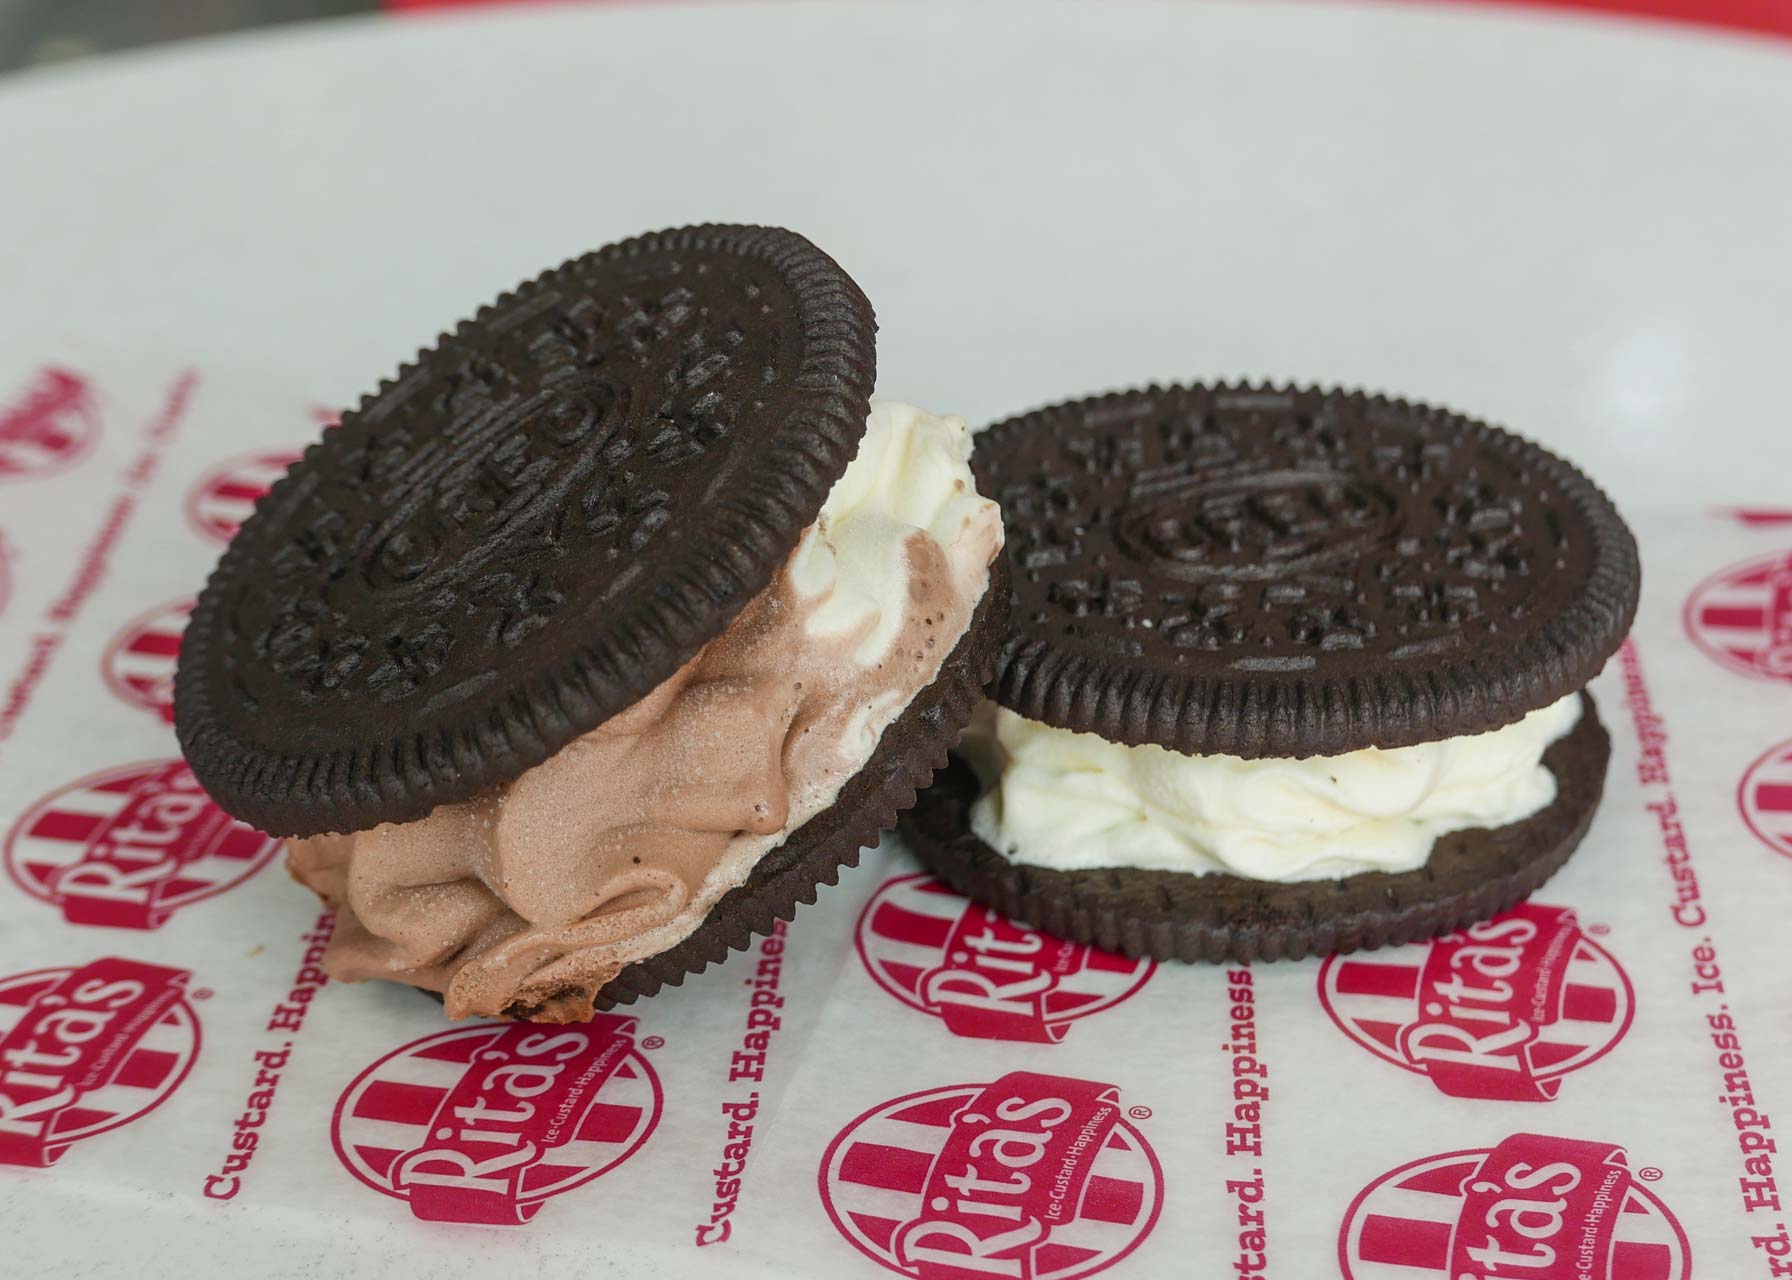 A Foodie’s Guide to the Best Ice Cream Sandwiches that will Satisfy Your Sweet Tooth